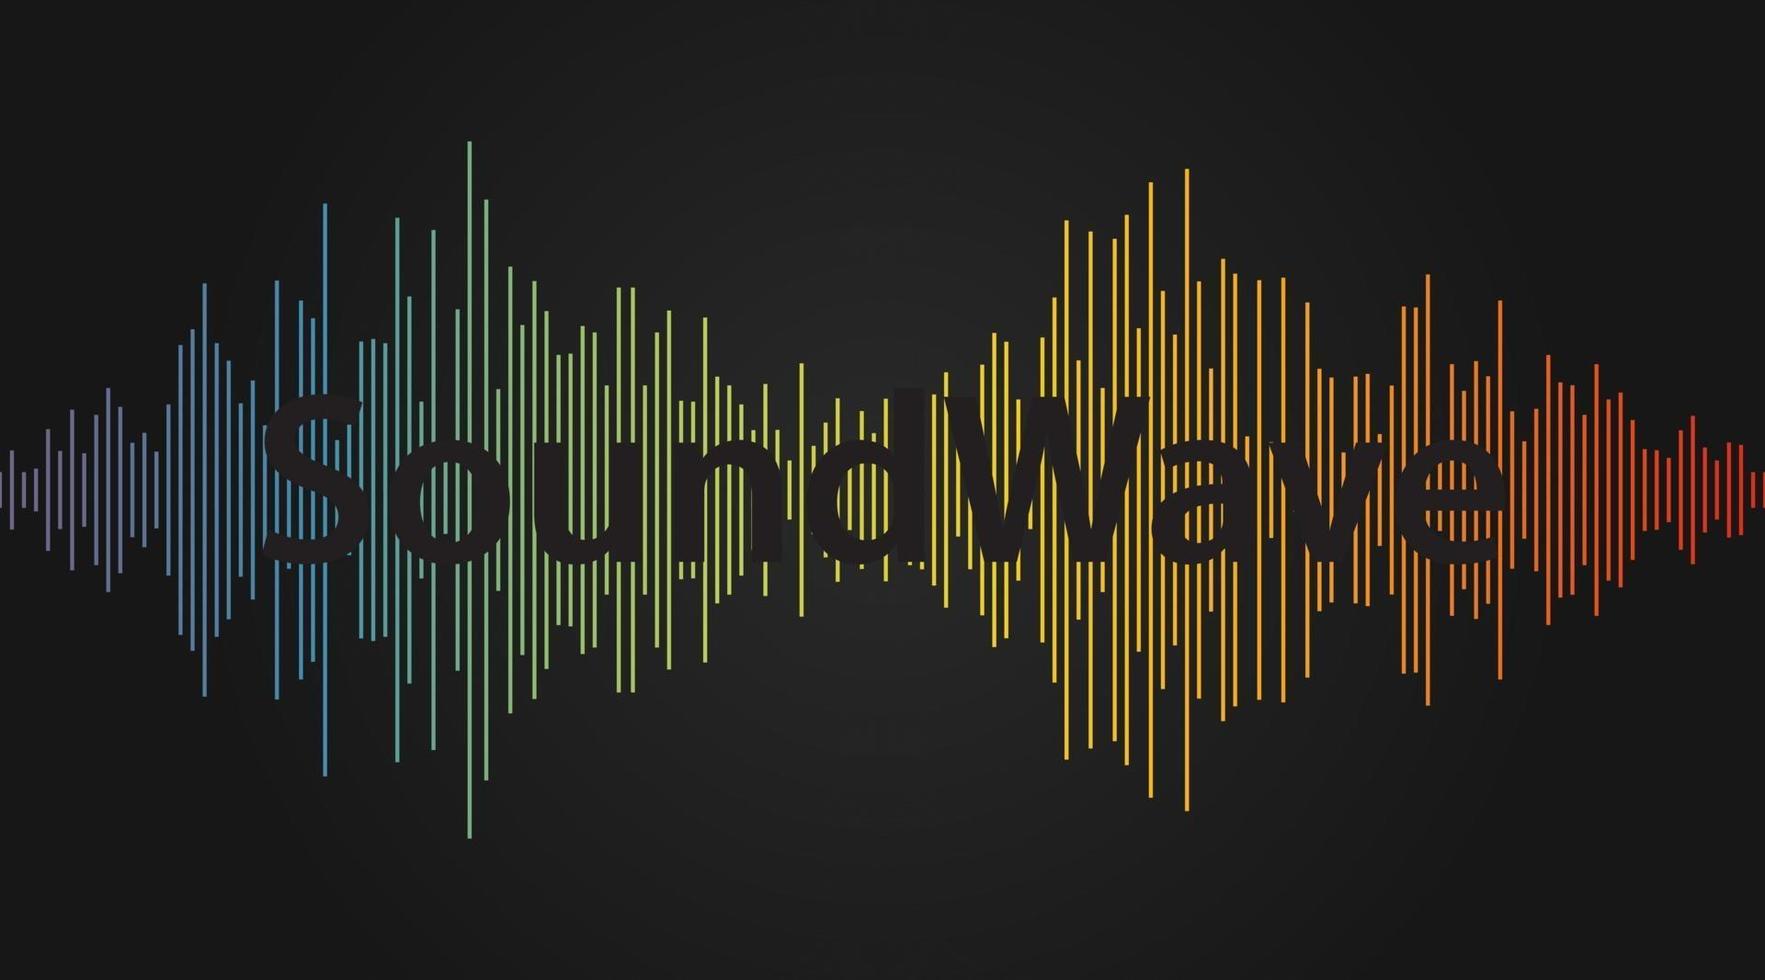 Sound wave, audio waveform background. Equalizer frequency range, voice recorder vector illustration. Colorful soundtrack playback backdrop. Isolated music playlist icon.